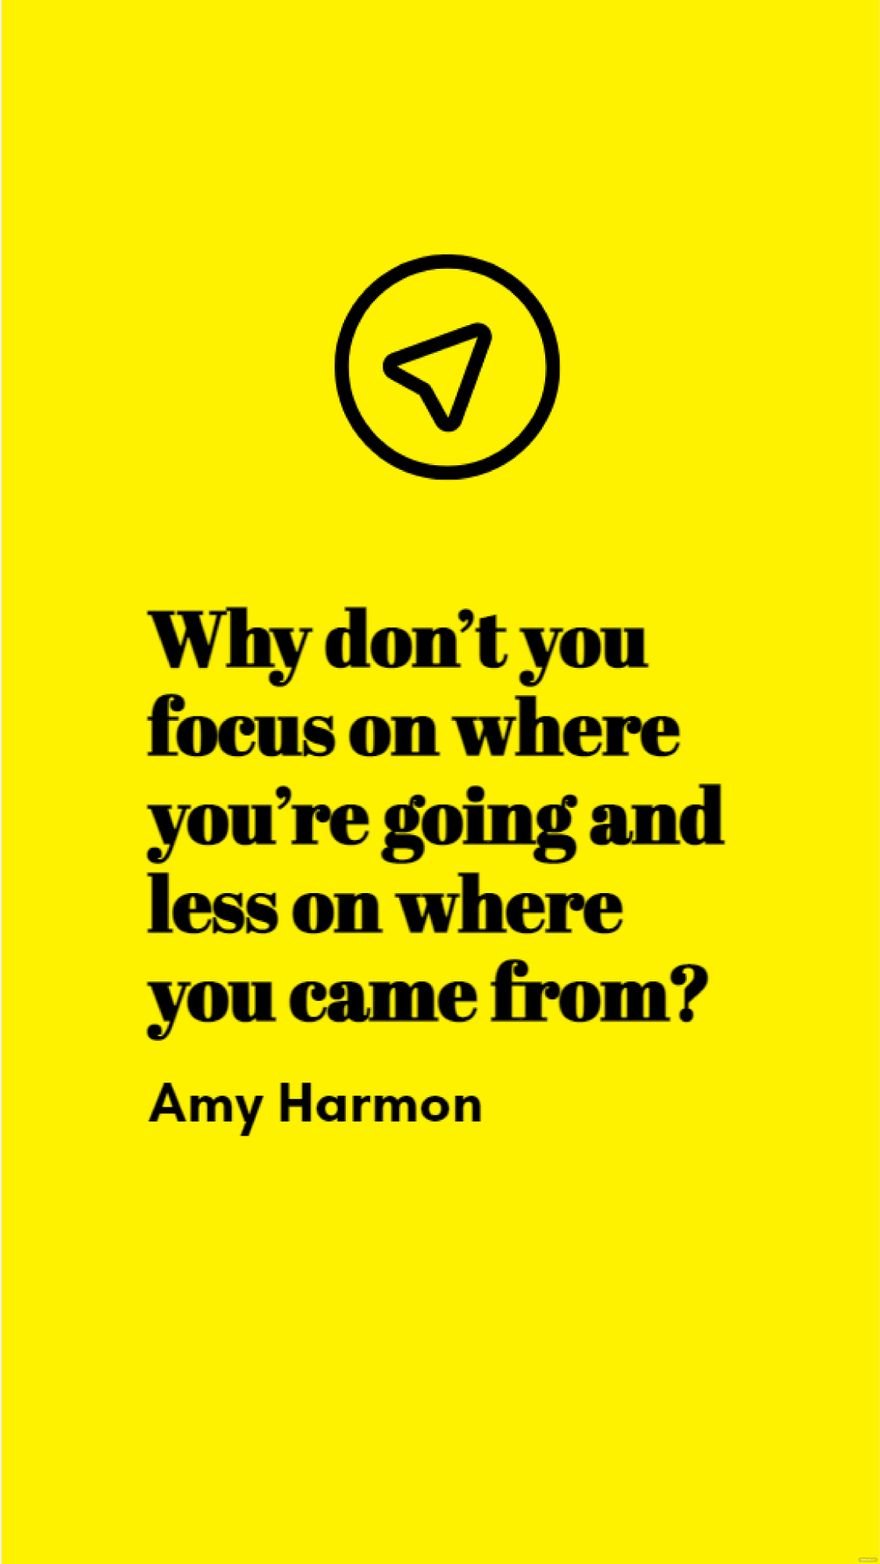 Amy Harmon - Why don’t you focus on where you’re going and less on where you came from?